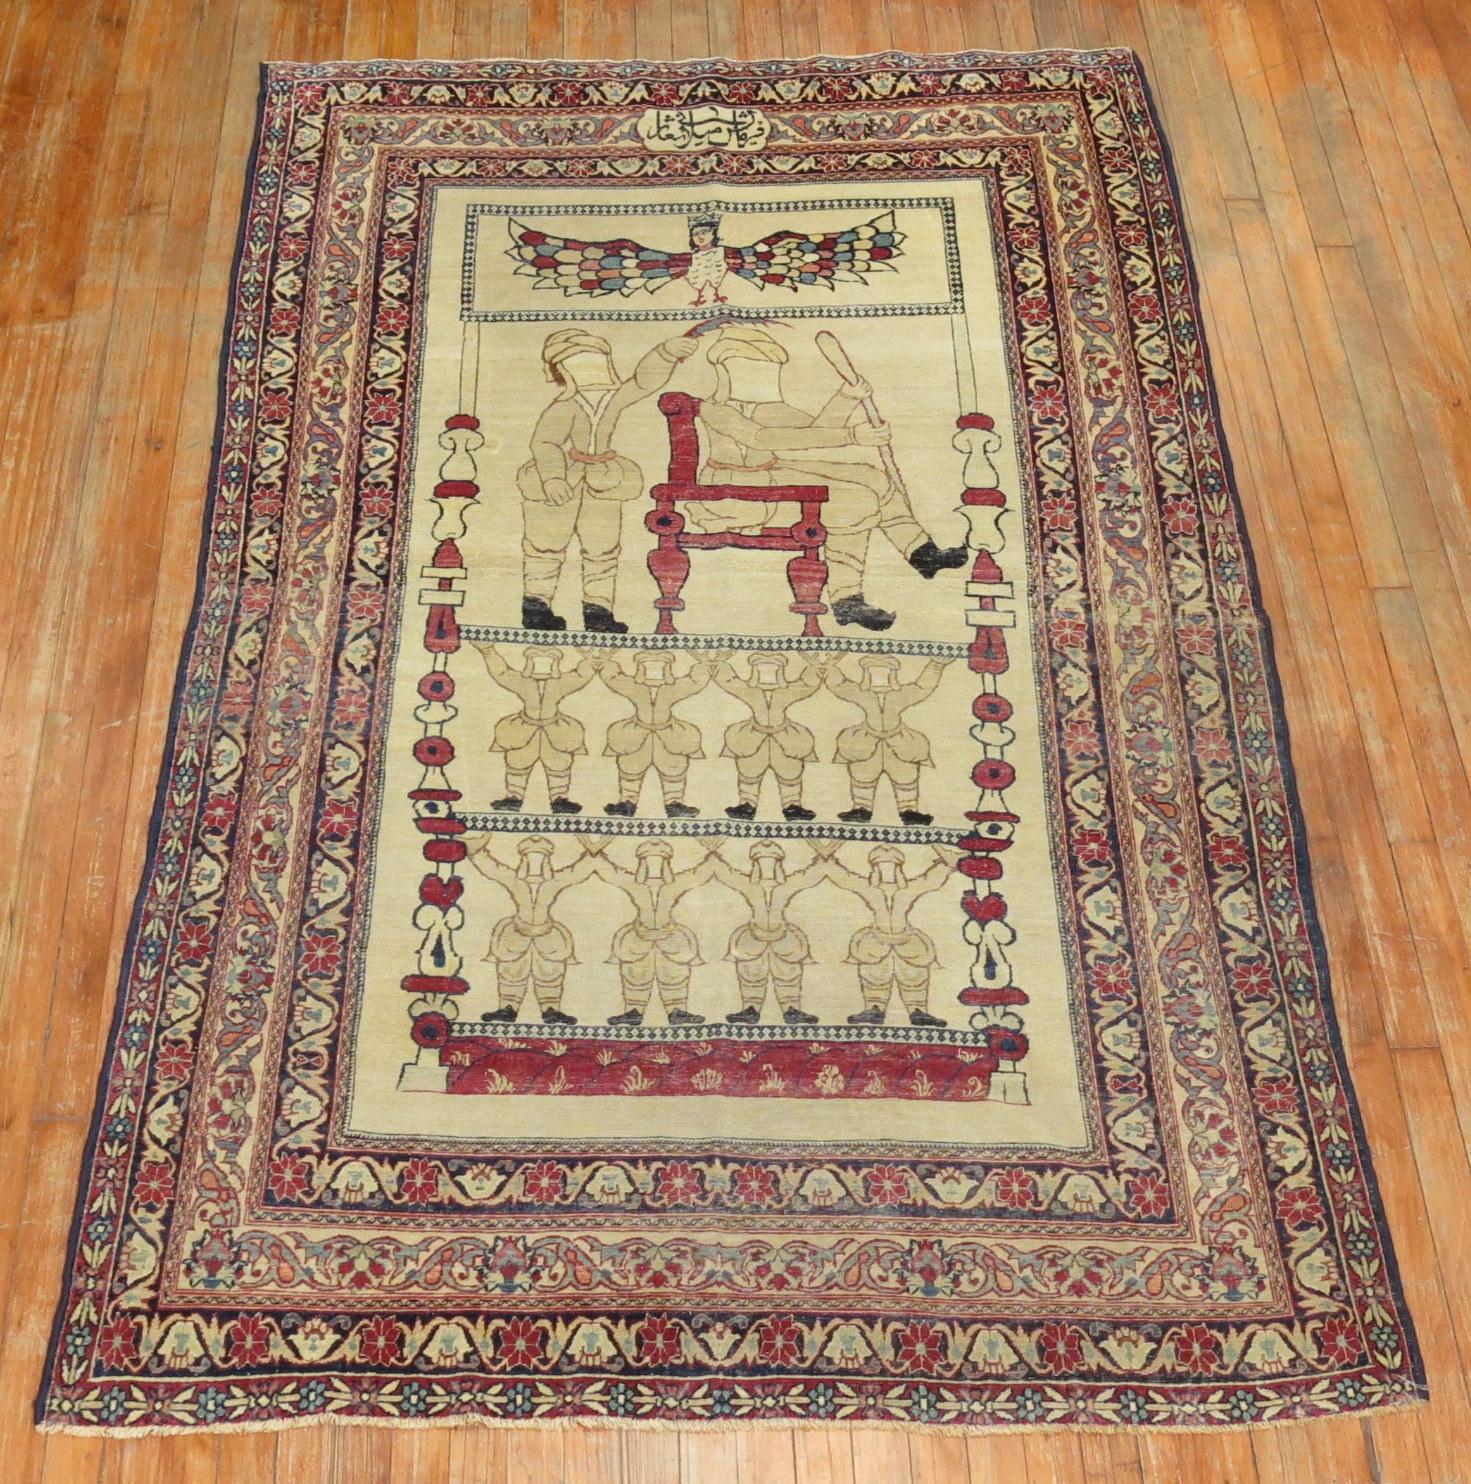 A late 19th century Persian Lavar Kerman rug. commissioned by milani workshop in northwest Iran inspired by the Persepolis . The rug has some religious attributes to it. It is signed too. The traditional colors are seen in many lavar Kerman rugs.